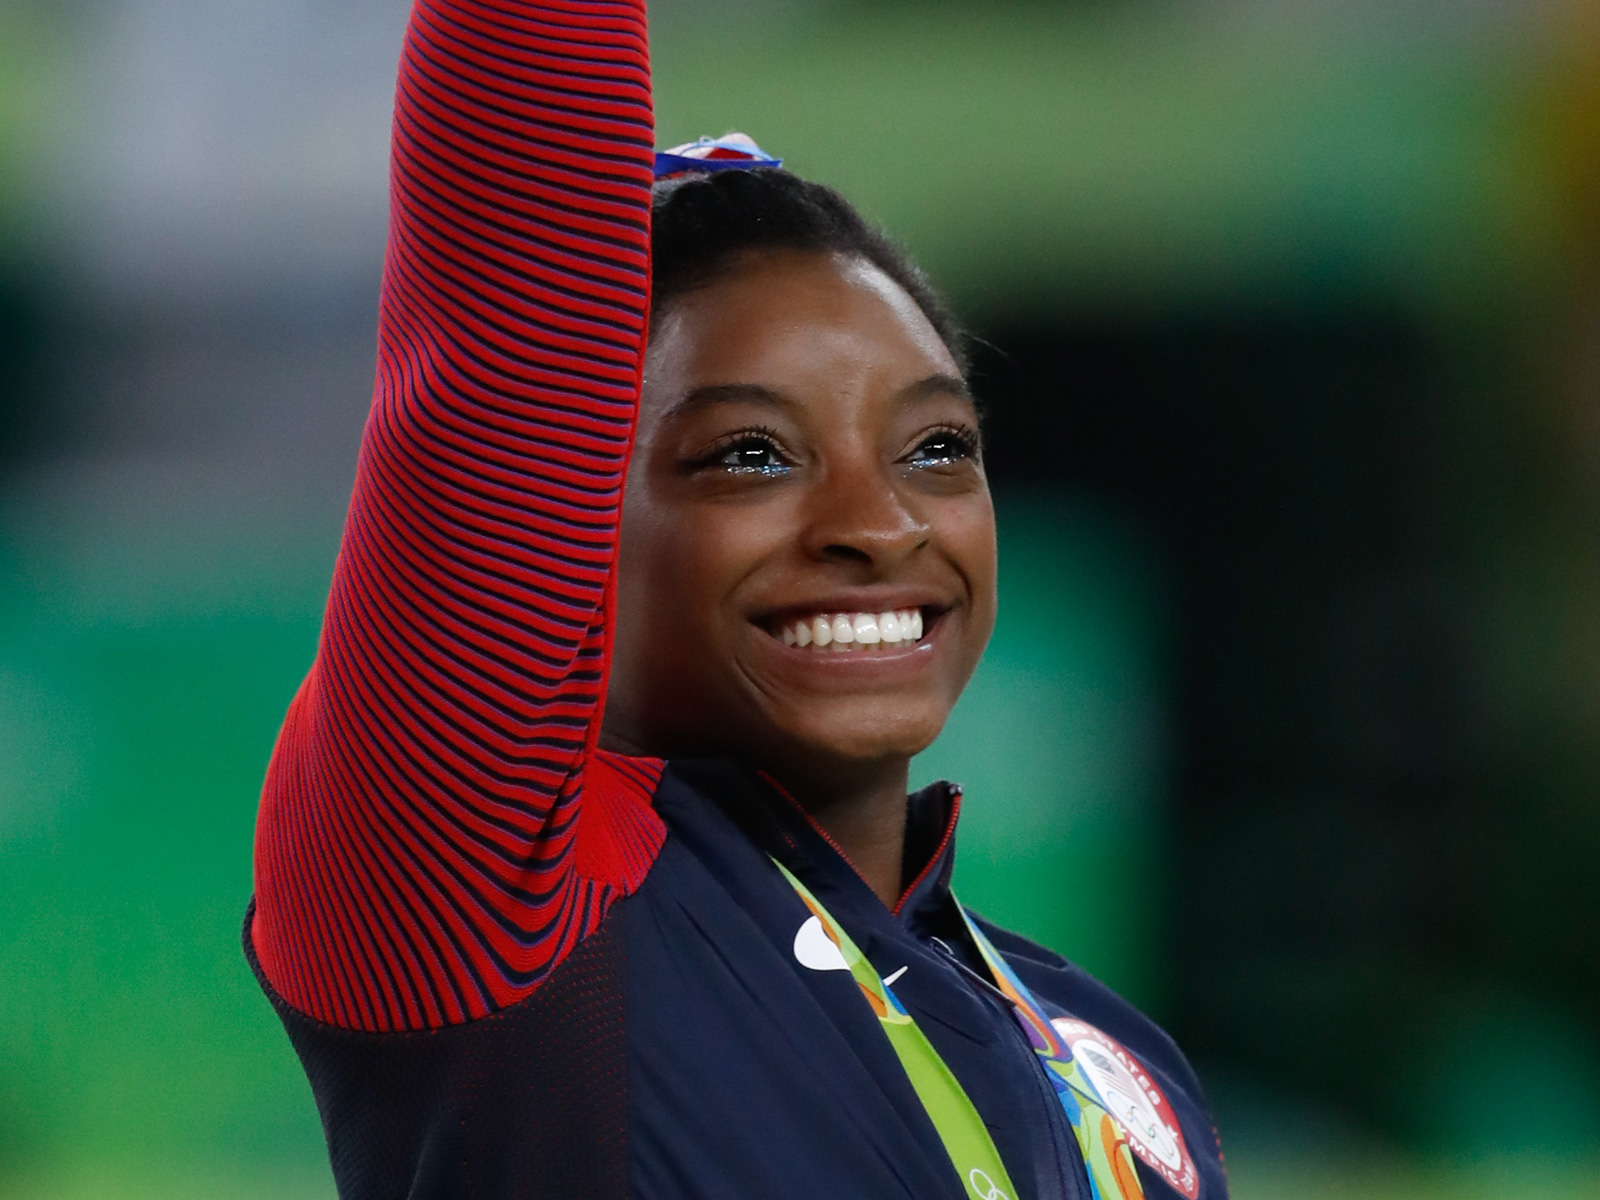 File Simone Biles At The 2016 Olympics All Around Gold Medal Podium 28262782114 Cropped Jpg Wikimedia Commons